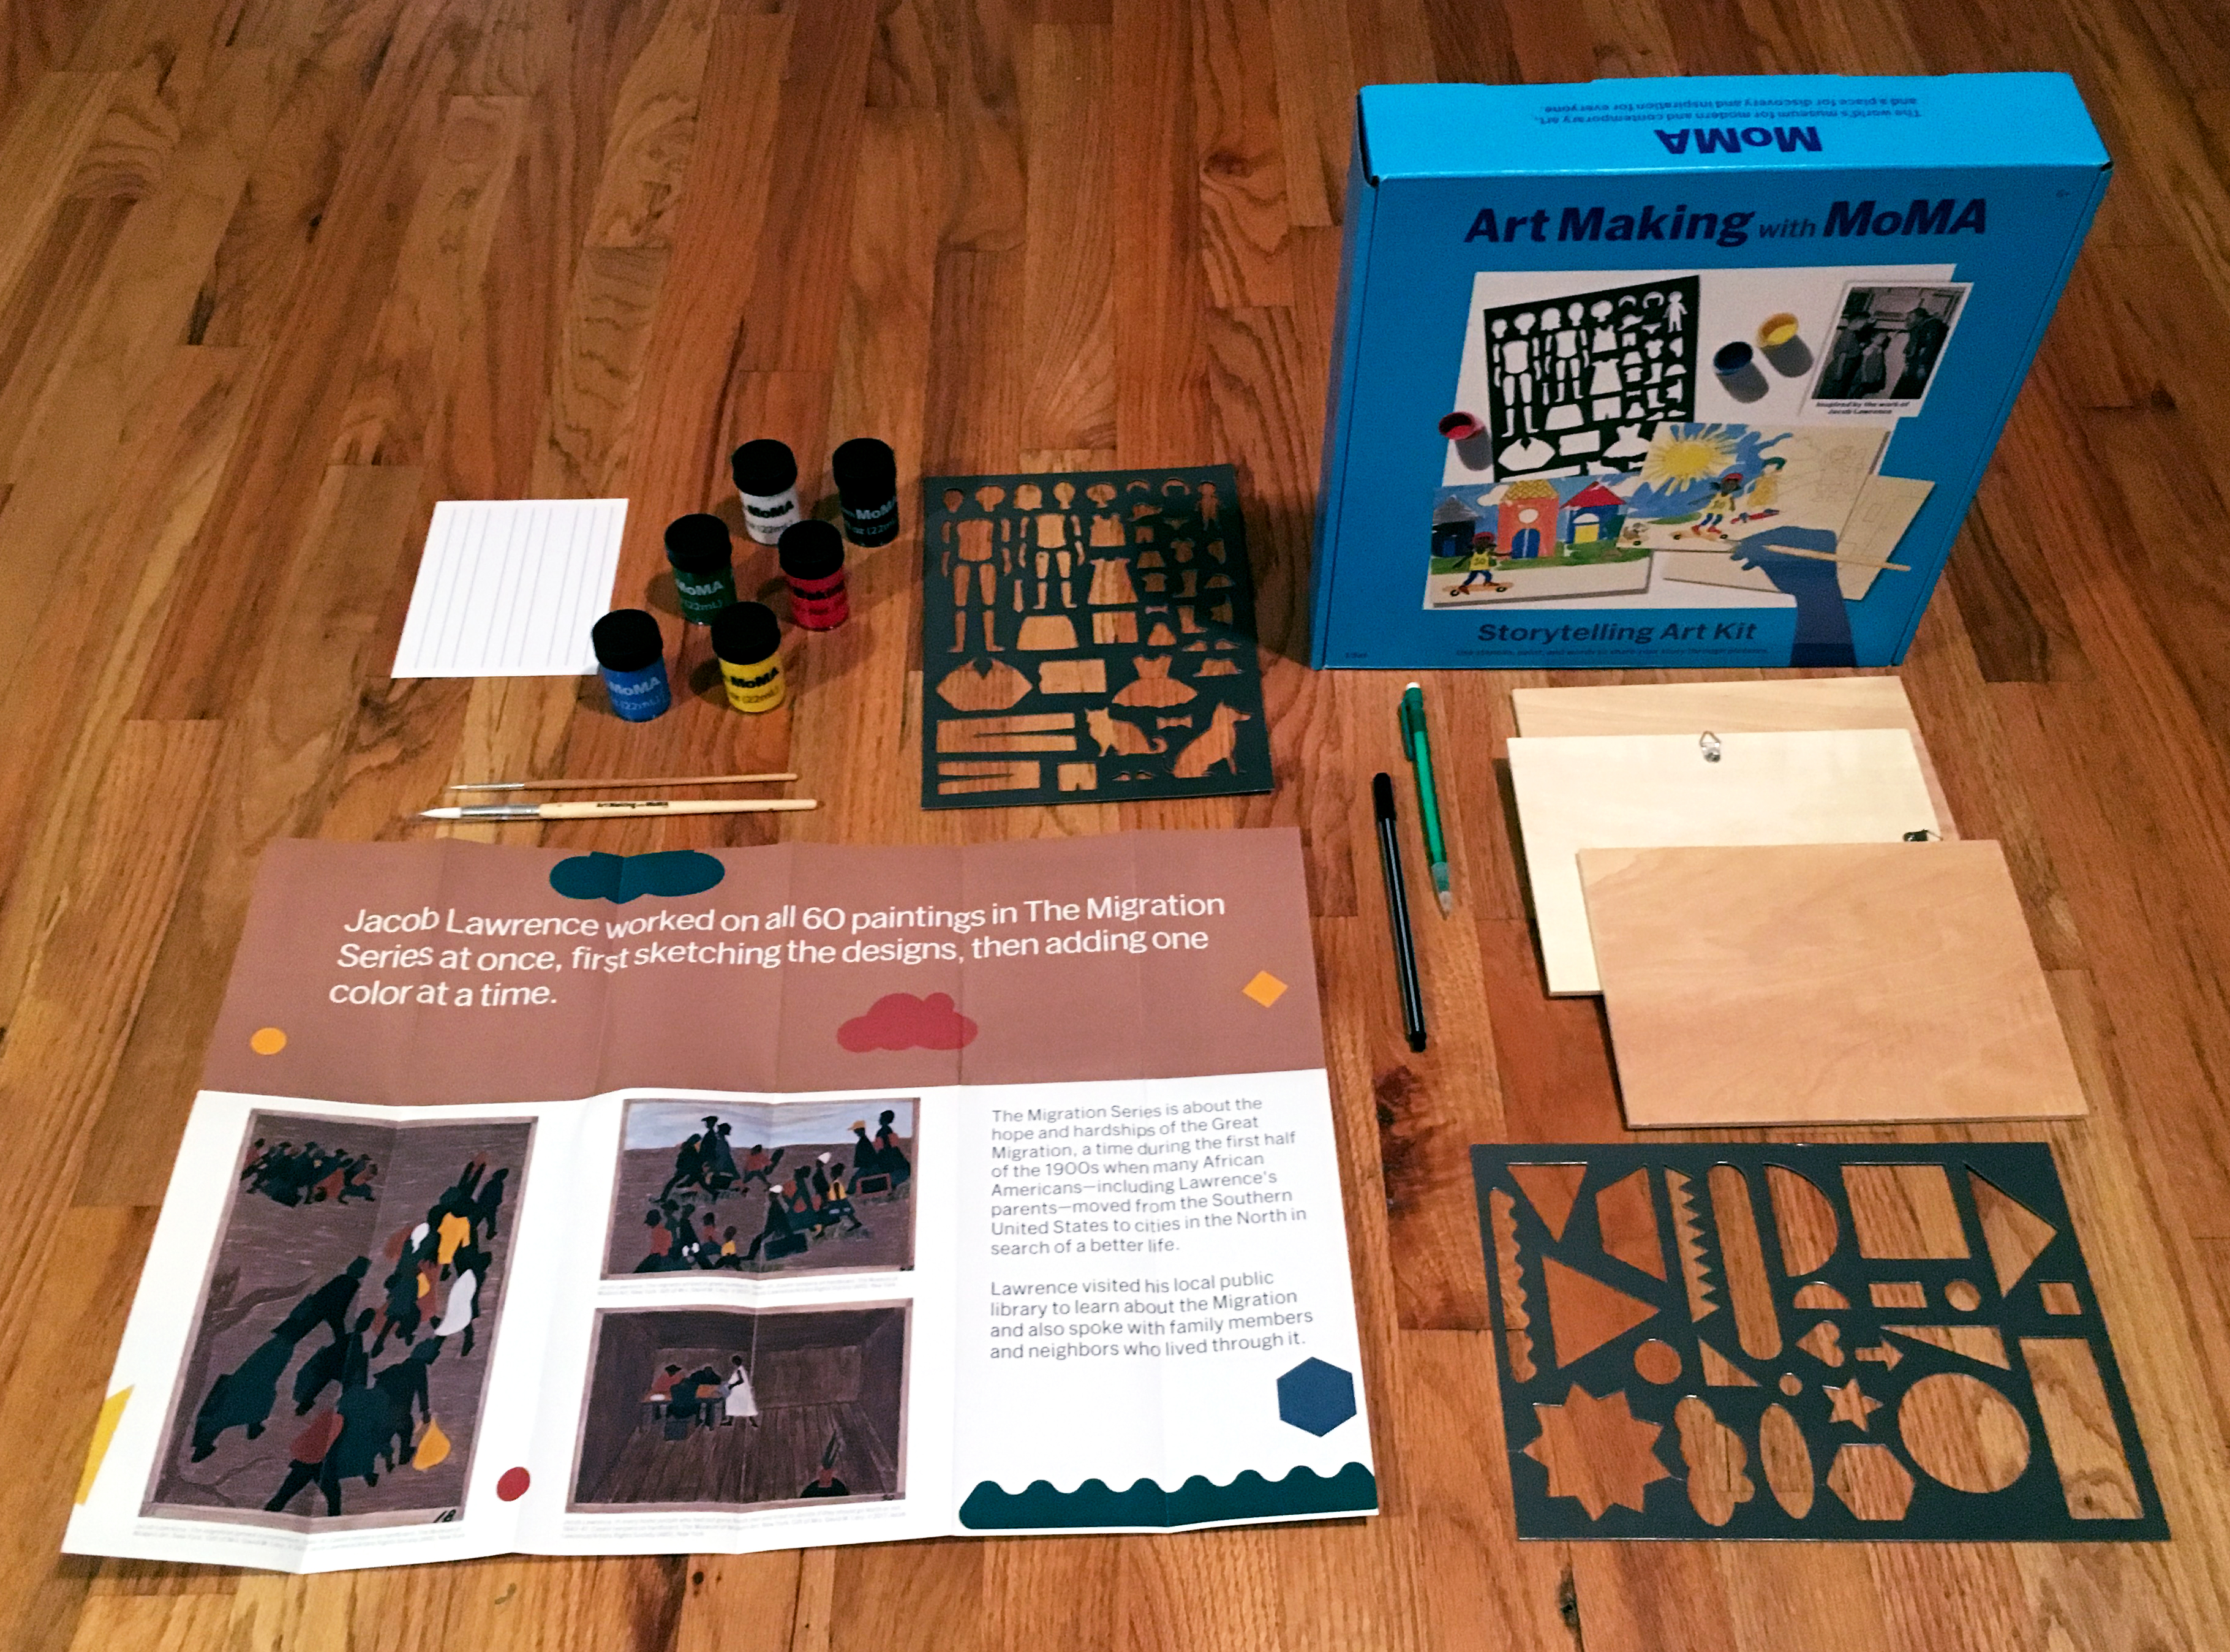 The contents of the Jacob Lawrence storytelling kit neatly laid out on the floor includes a pamphlet, paints, stencils, paintbrushes, and three wooden boards.